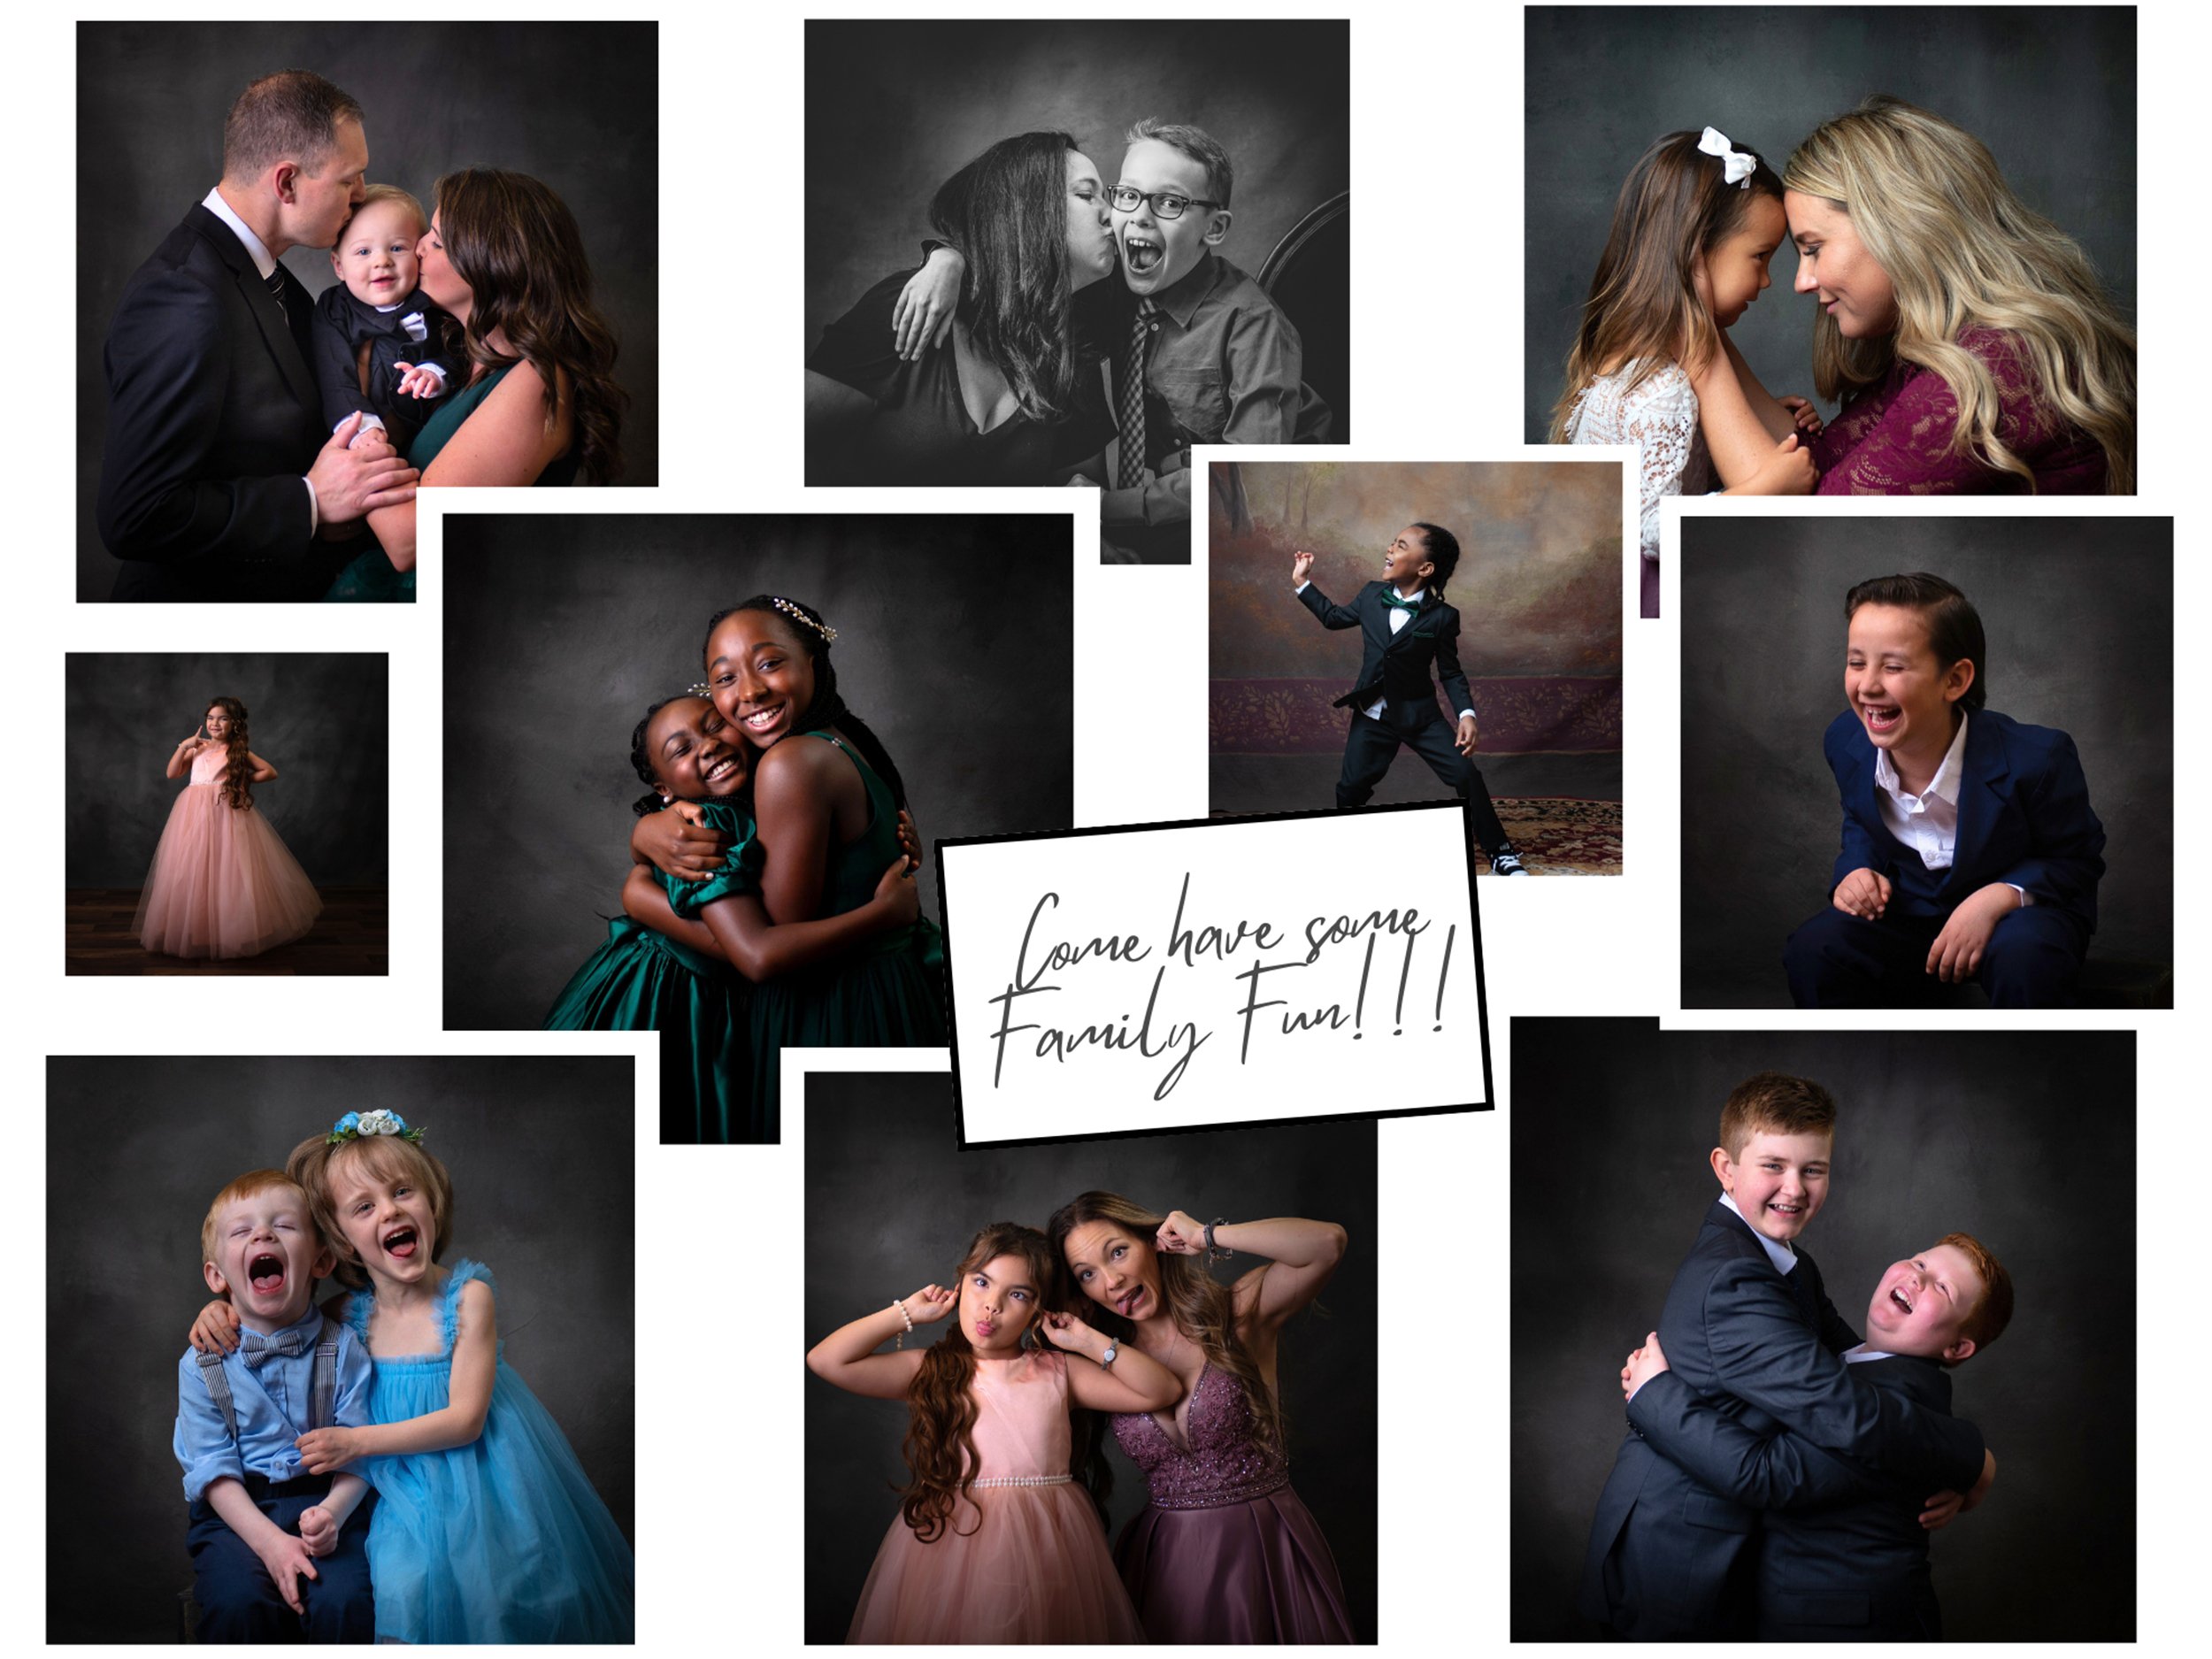 family-fun-collage-gallery.jpg